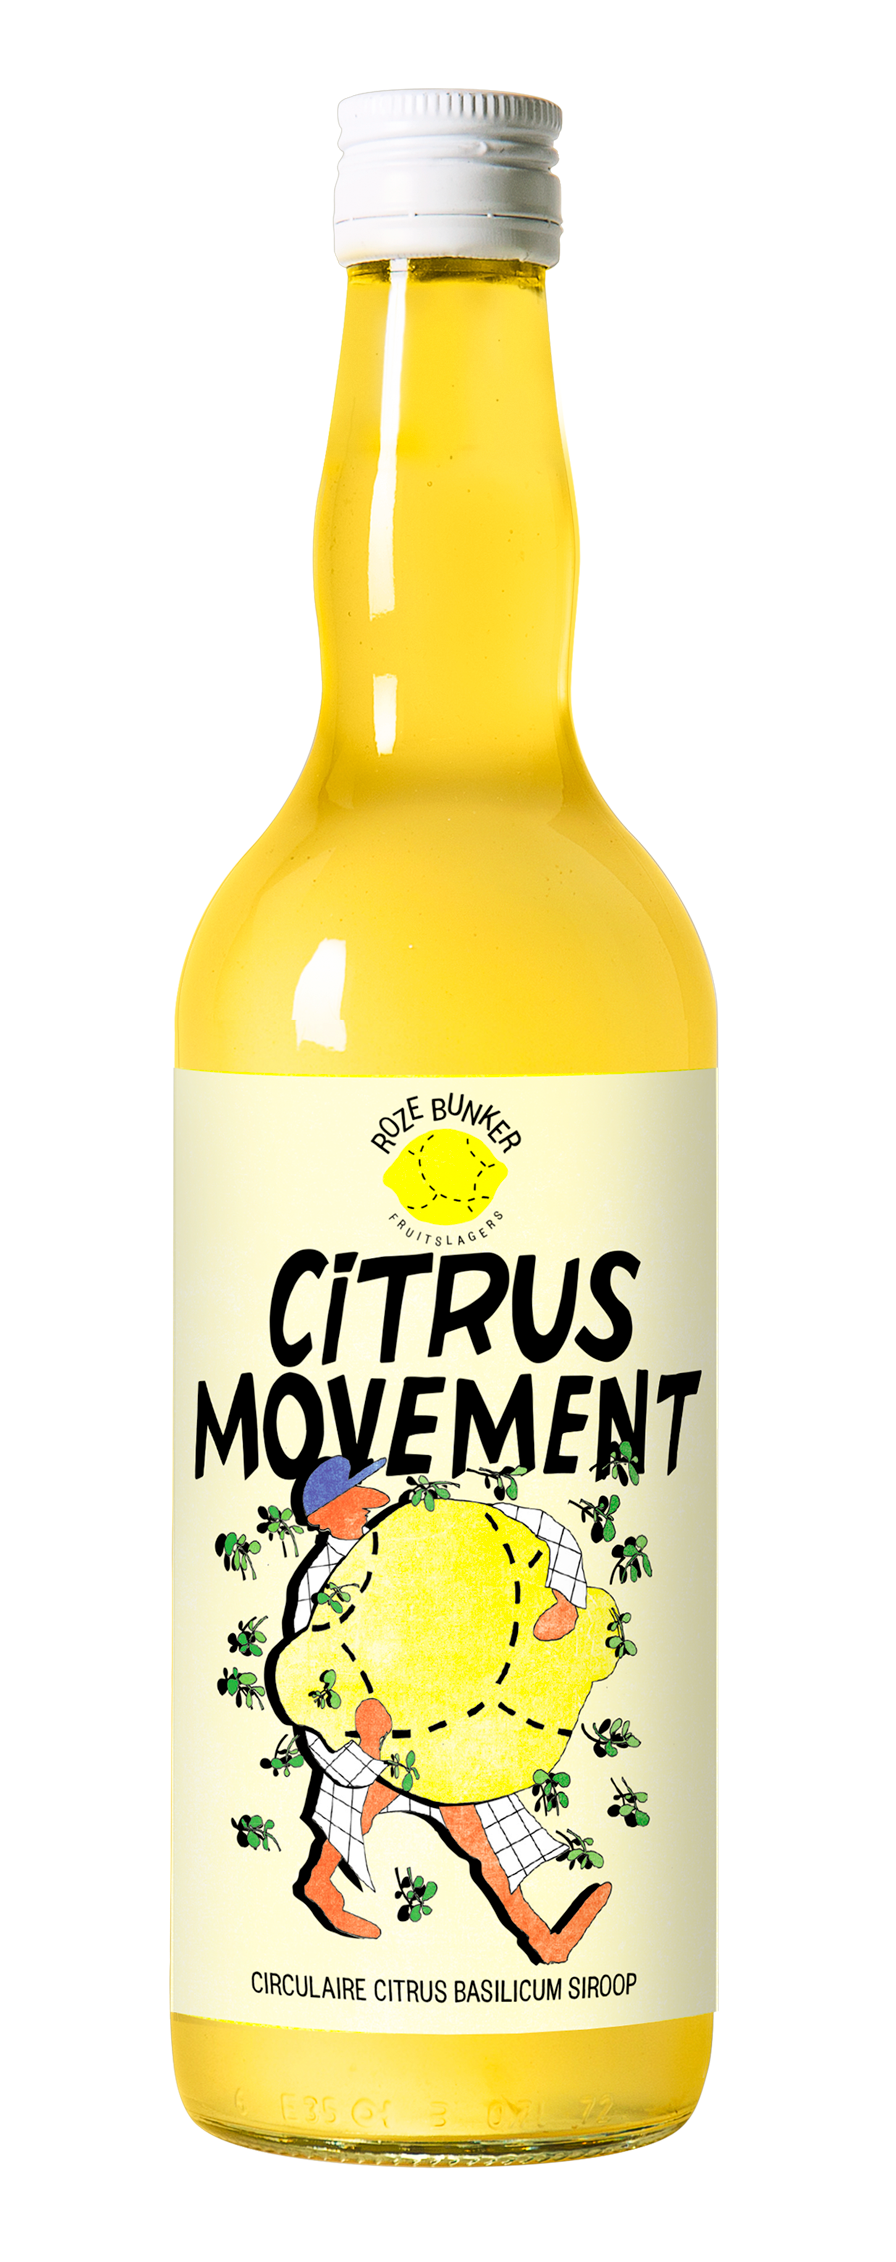 Bottle of citrus movement syrup by Roze Bunker